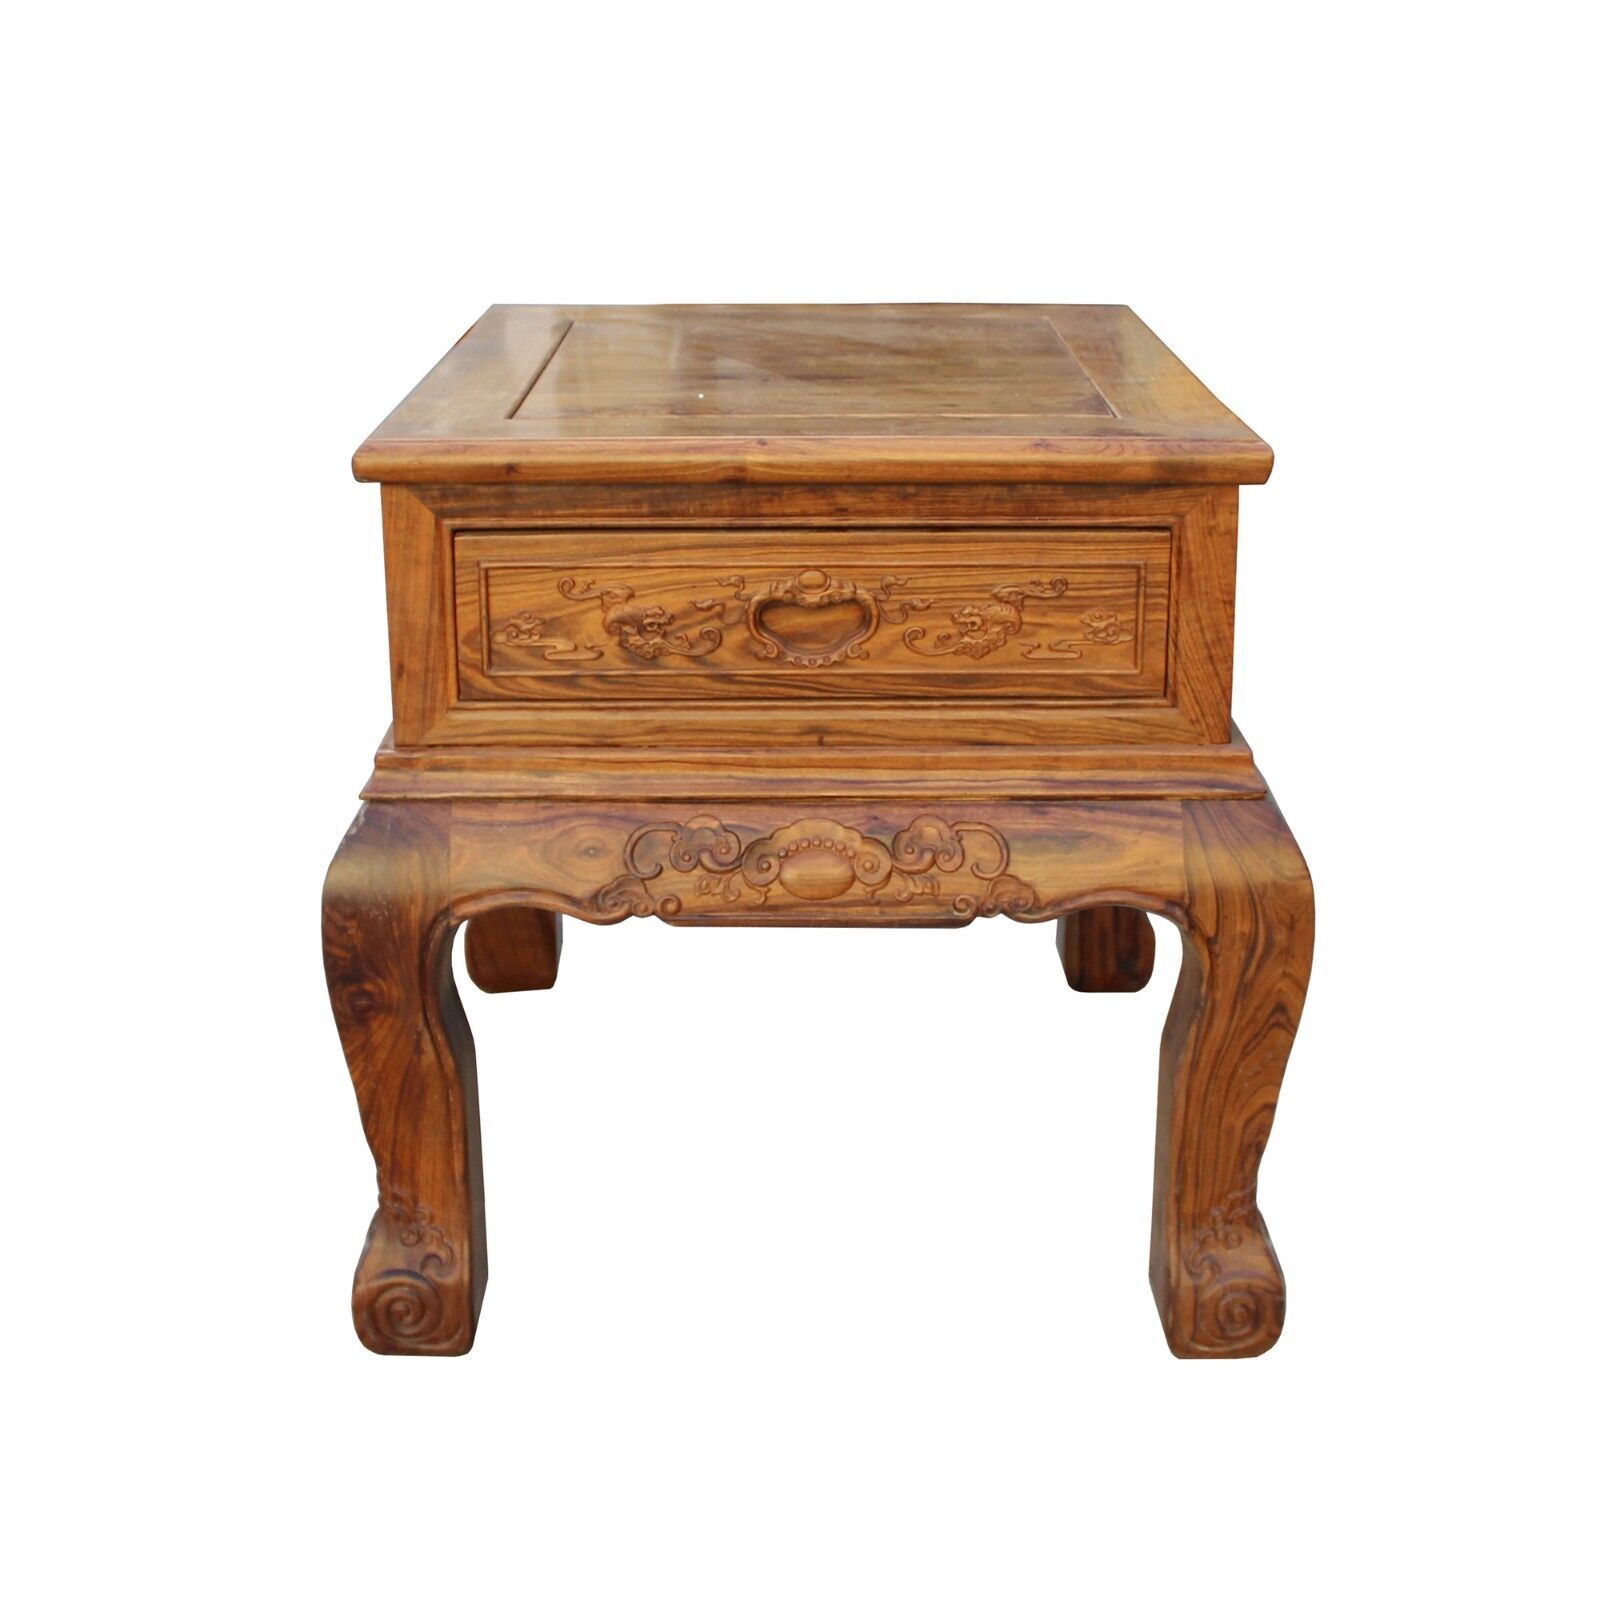 Chinese Oriental Huali Rosewood Flower Motif Tea Table Stand cs4579 Handmade Does Not Apply